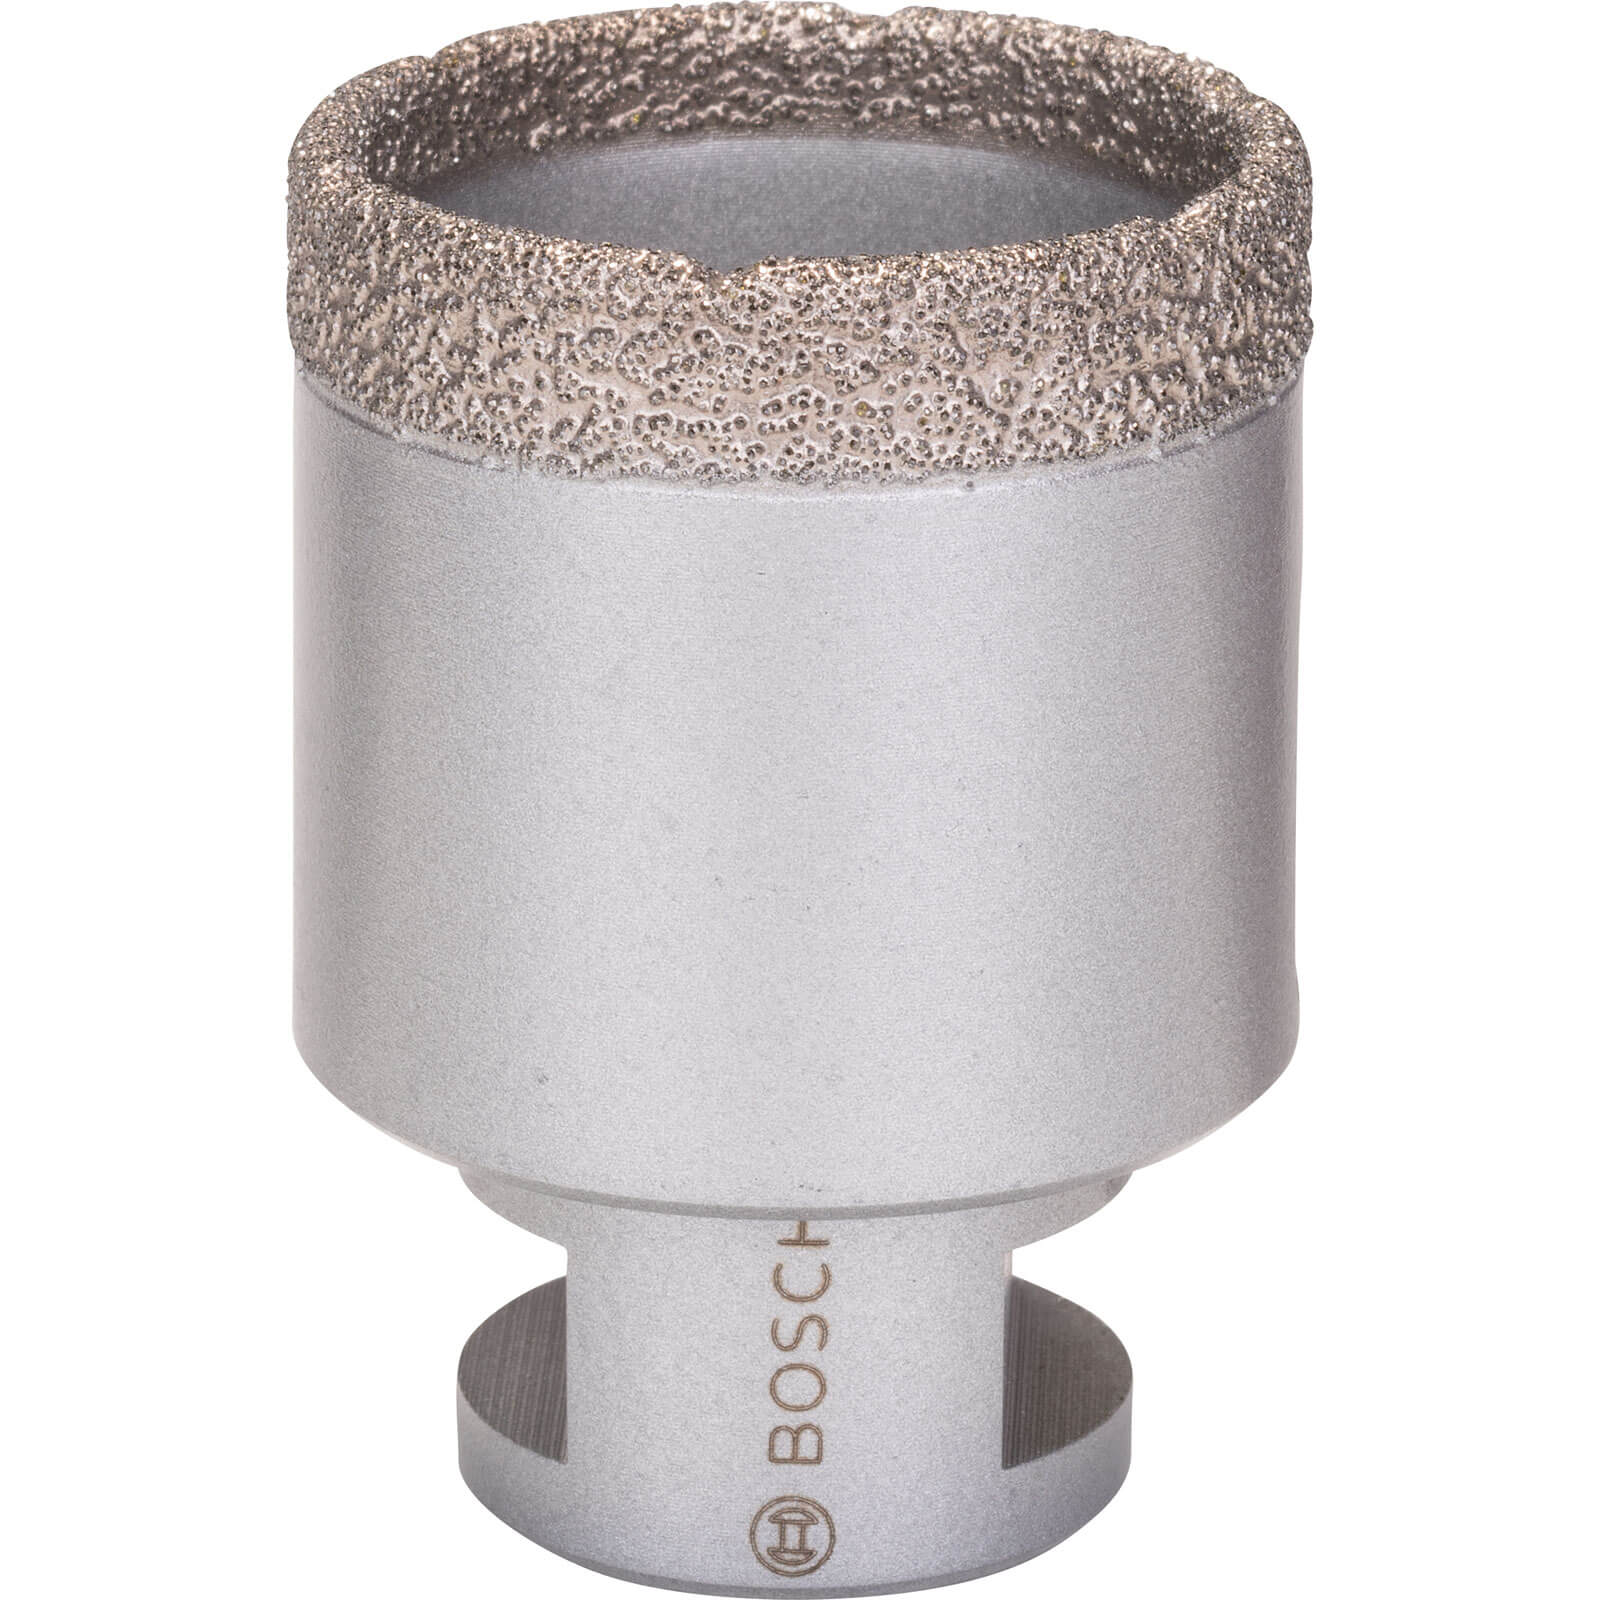 Photo of Bosch Angle Grinder Dry Diamond Hole Cutter For Ceramics 45mm